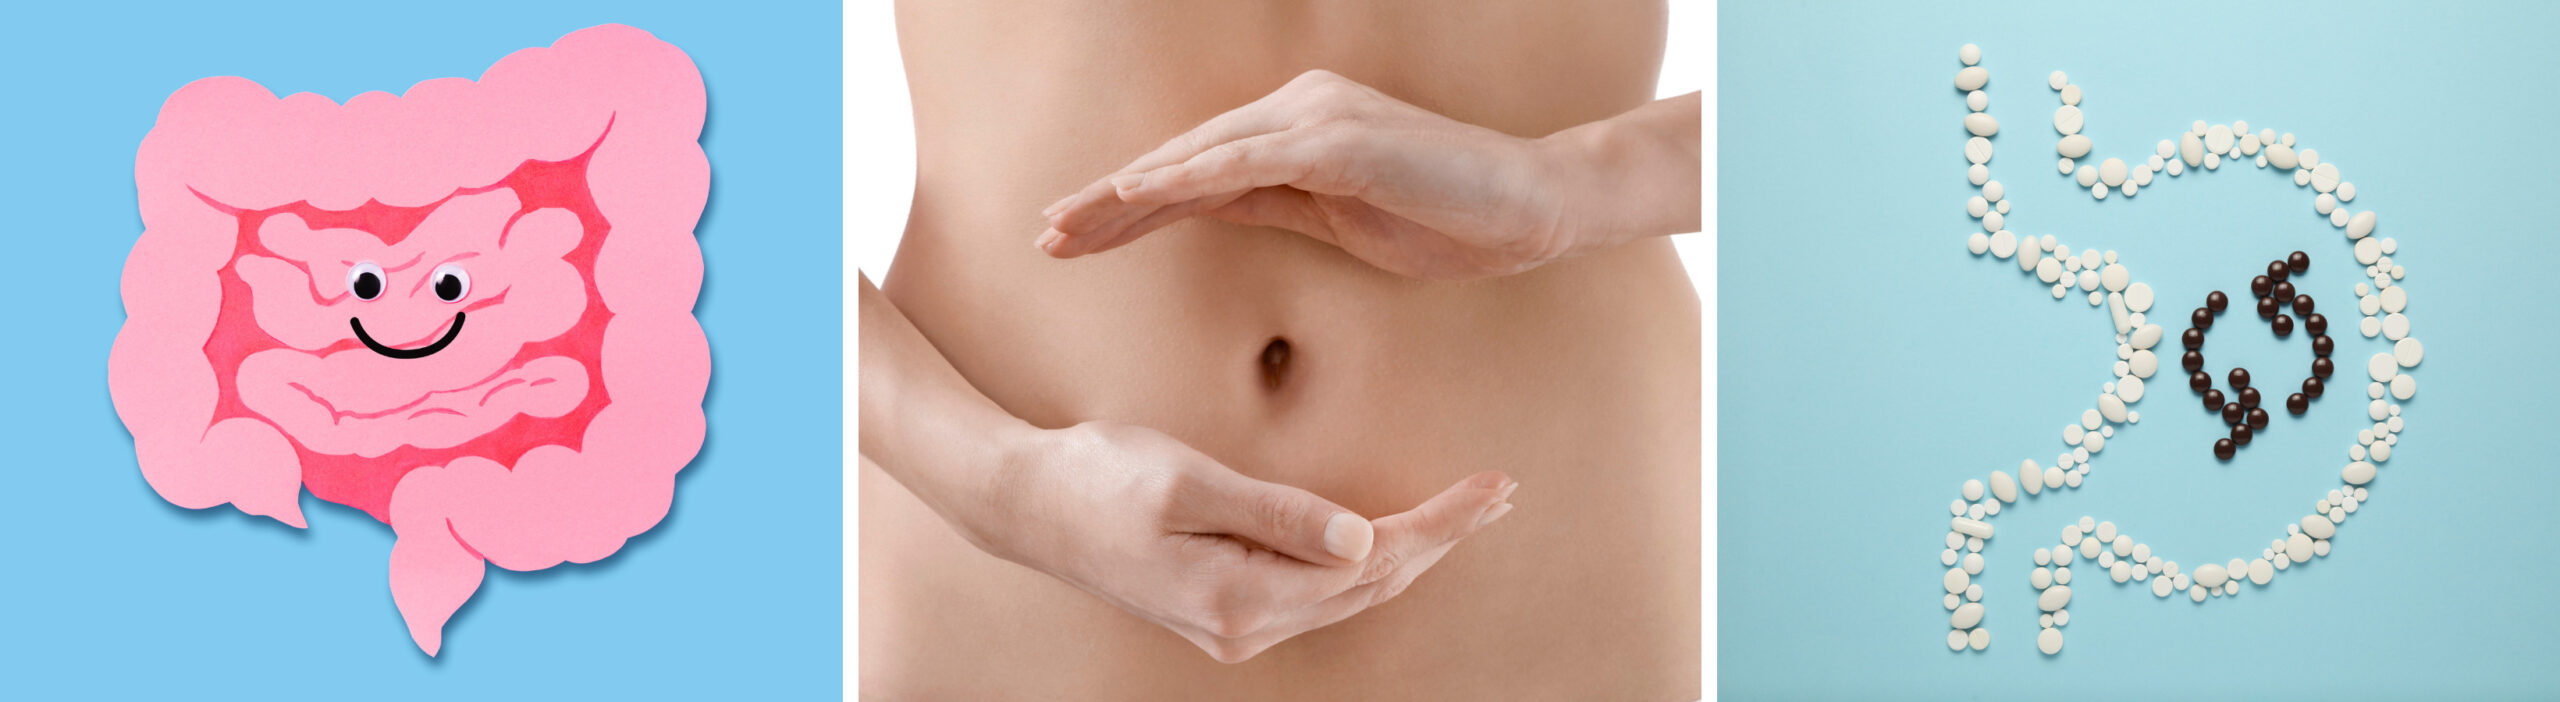 Digestive Disorders: Acupuncture & Naturopathic Medicine Solutions